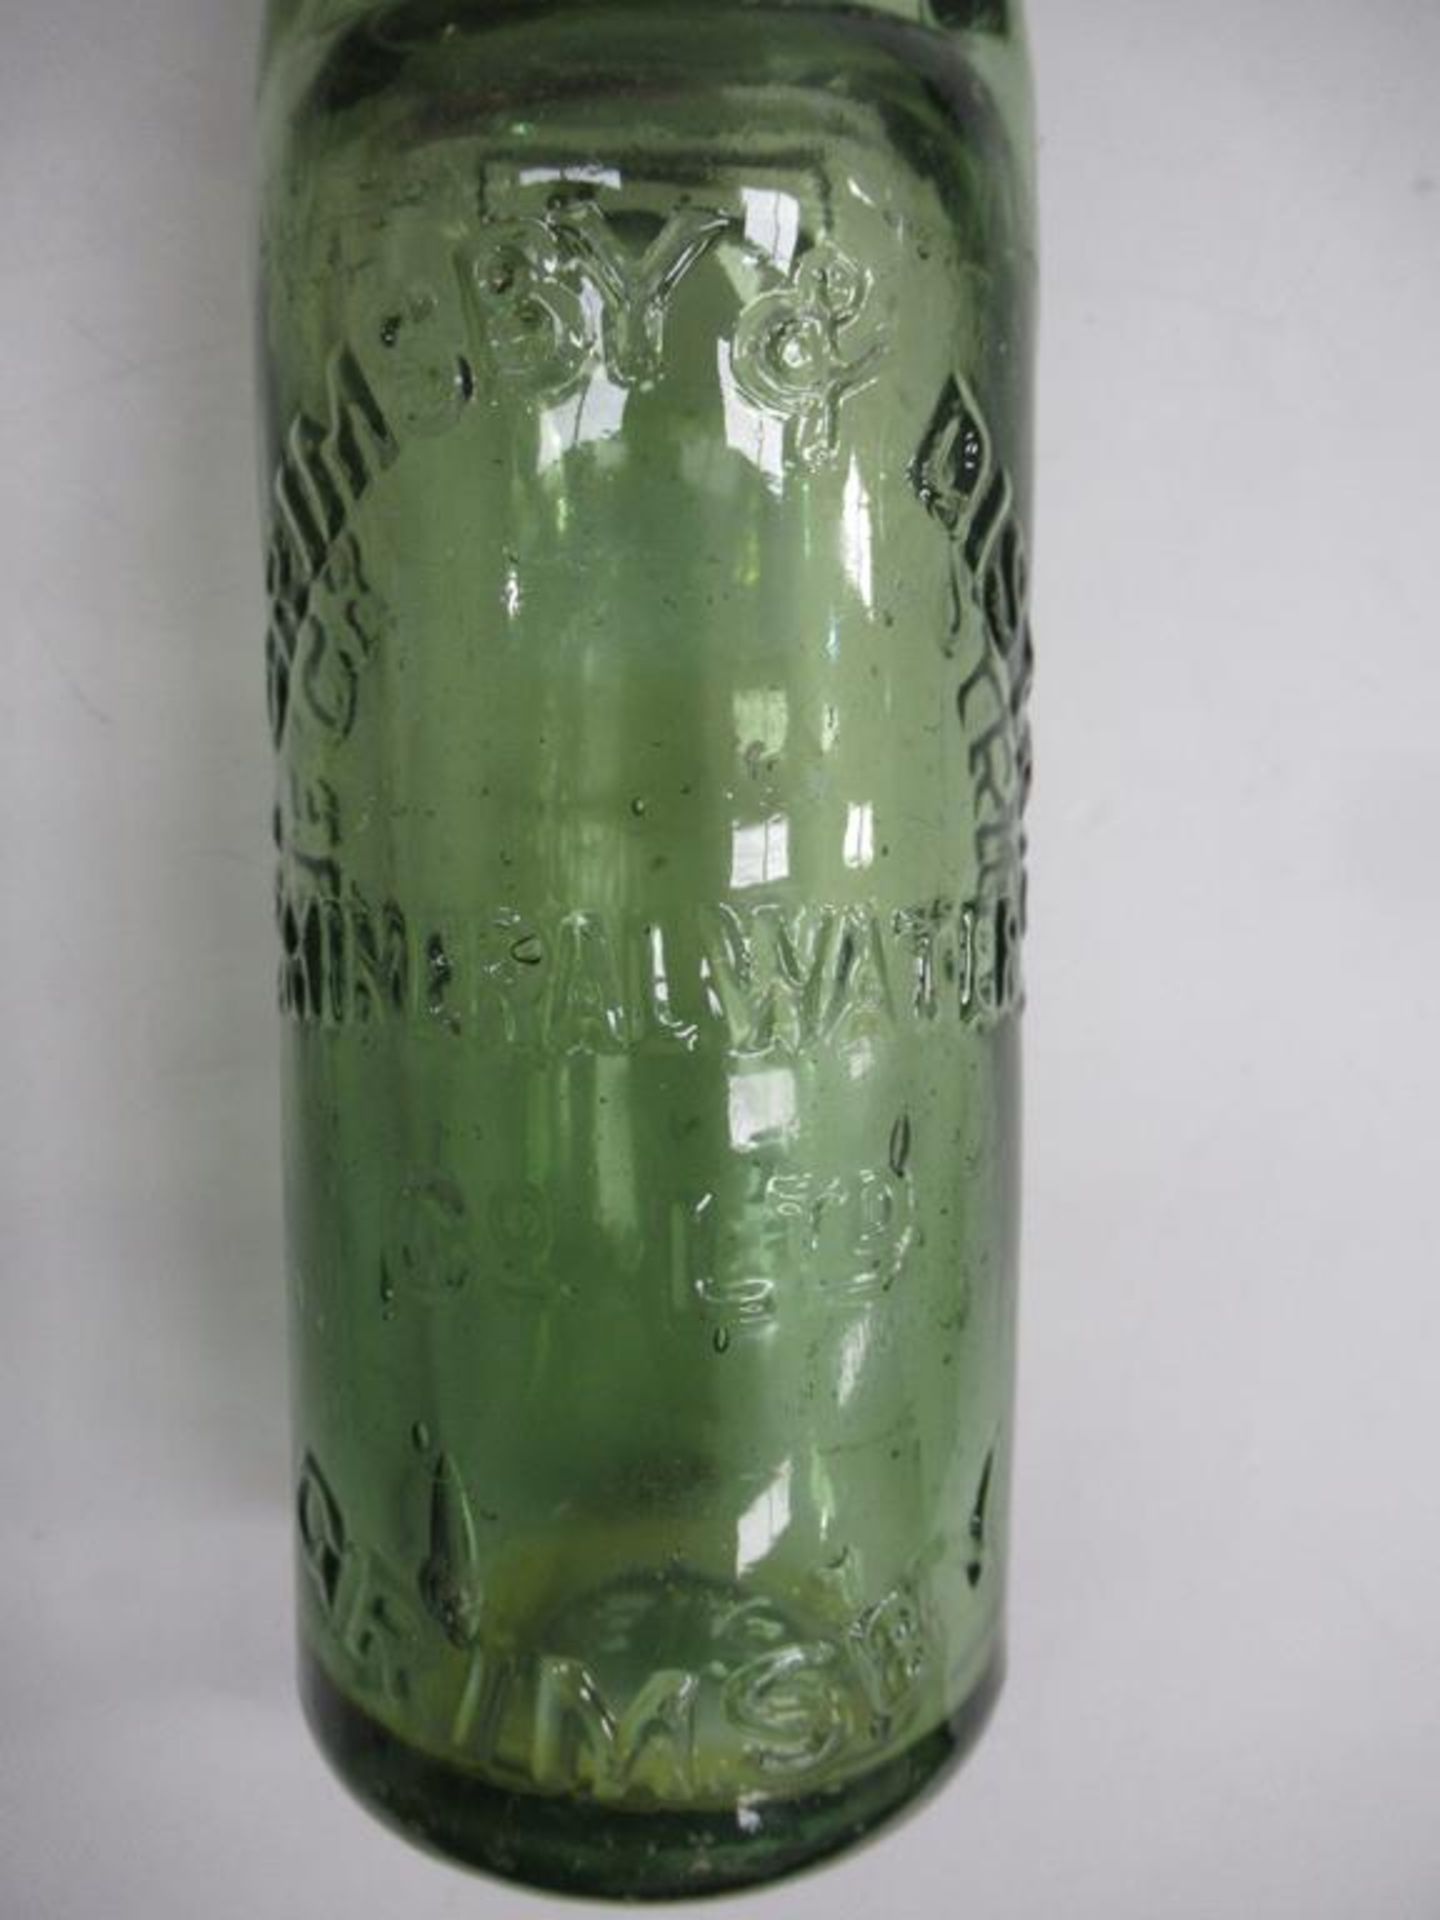 The Grimsby & District Mineral Water Co. Ltd coloured codd bottle (10oz) - Image 6 of 6